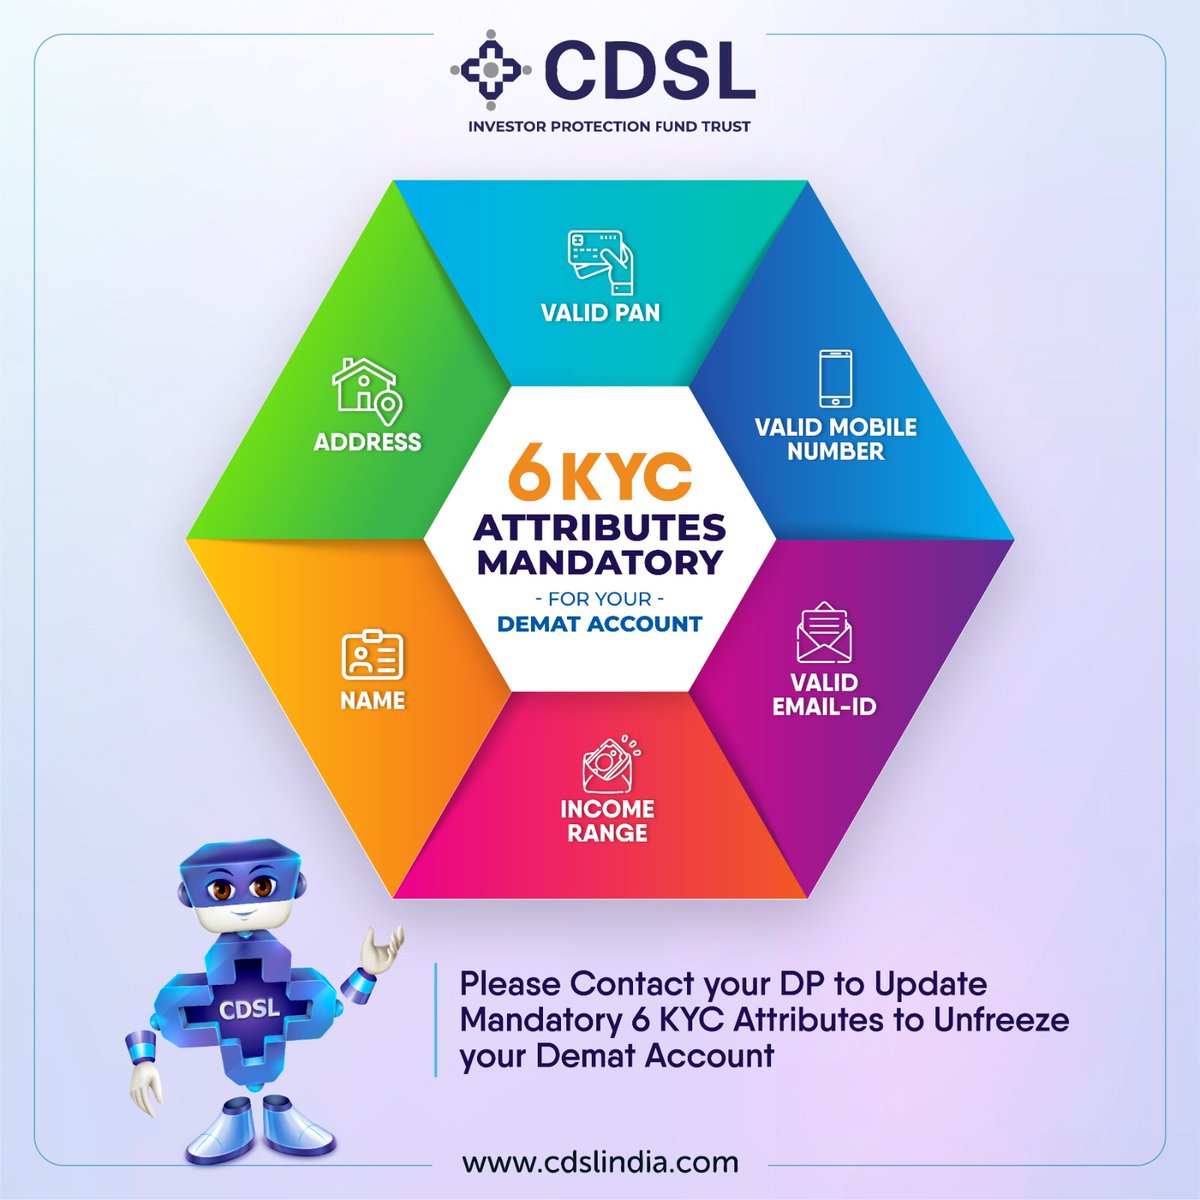 Please update mandatory 6 KYC attributes to unfreeze your demat account.

Connect with your DP for any queries.

cdslindia.com/DP/dplist.aspx
.
.
#KYC #CDSL #depositoryparticipants #demat #CDSLIndia #CDSL #mutualfunds #challengingtimes #stockmarket #stockbroker #atmanirbharInvestor